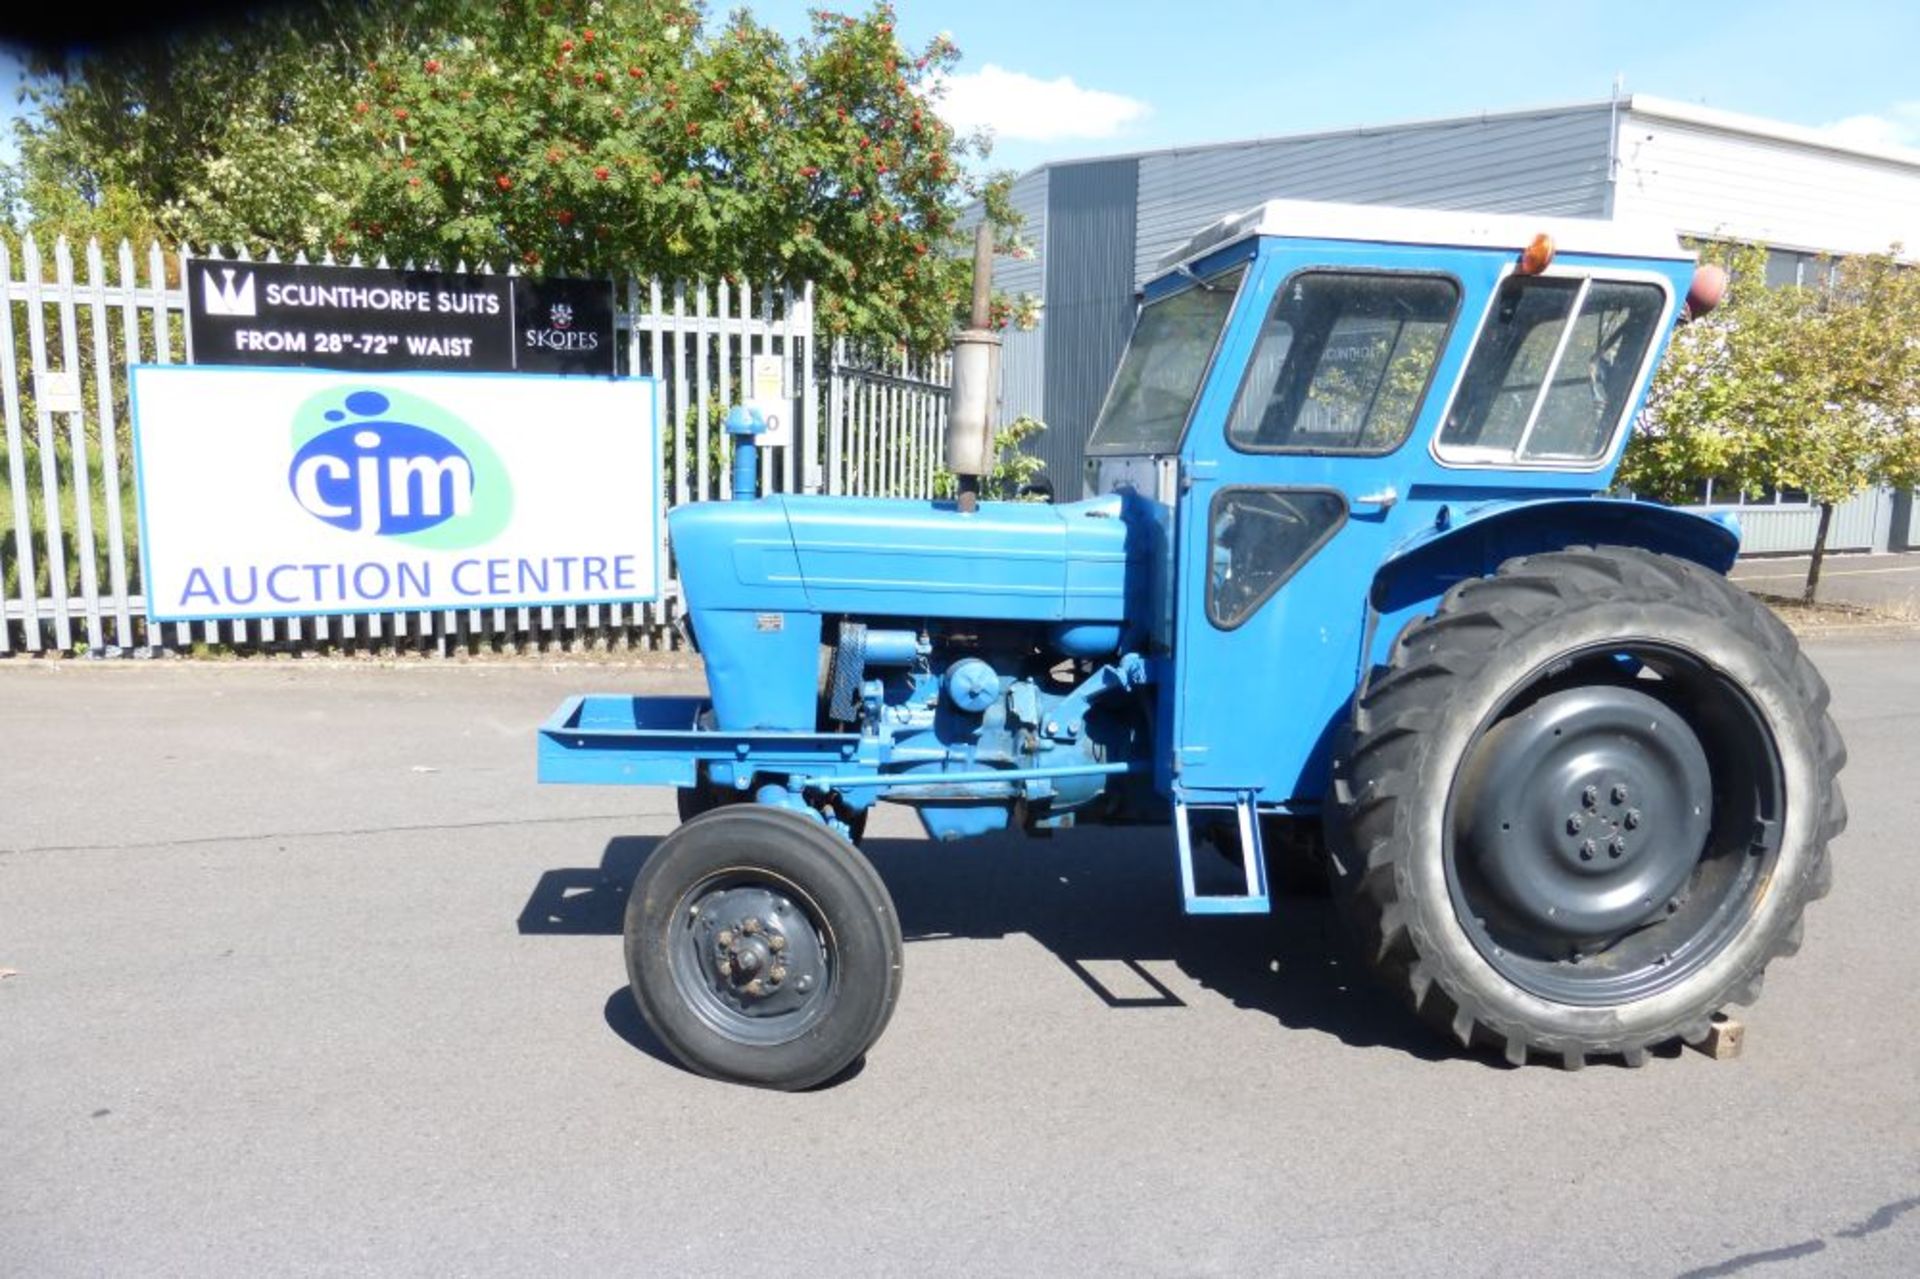 1969 Ford 4000 2WD Tractor fitted with a Duncan Slant Safety Cab, 3 CYL Diesel Engine - Image 18 of 18